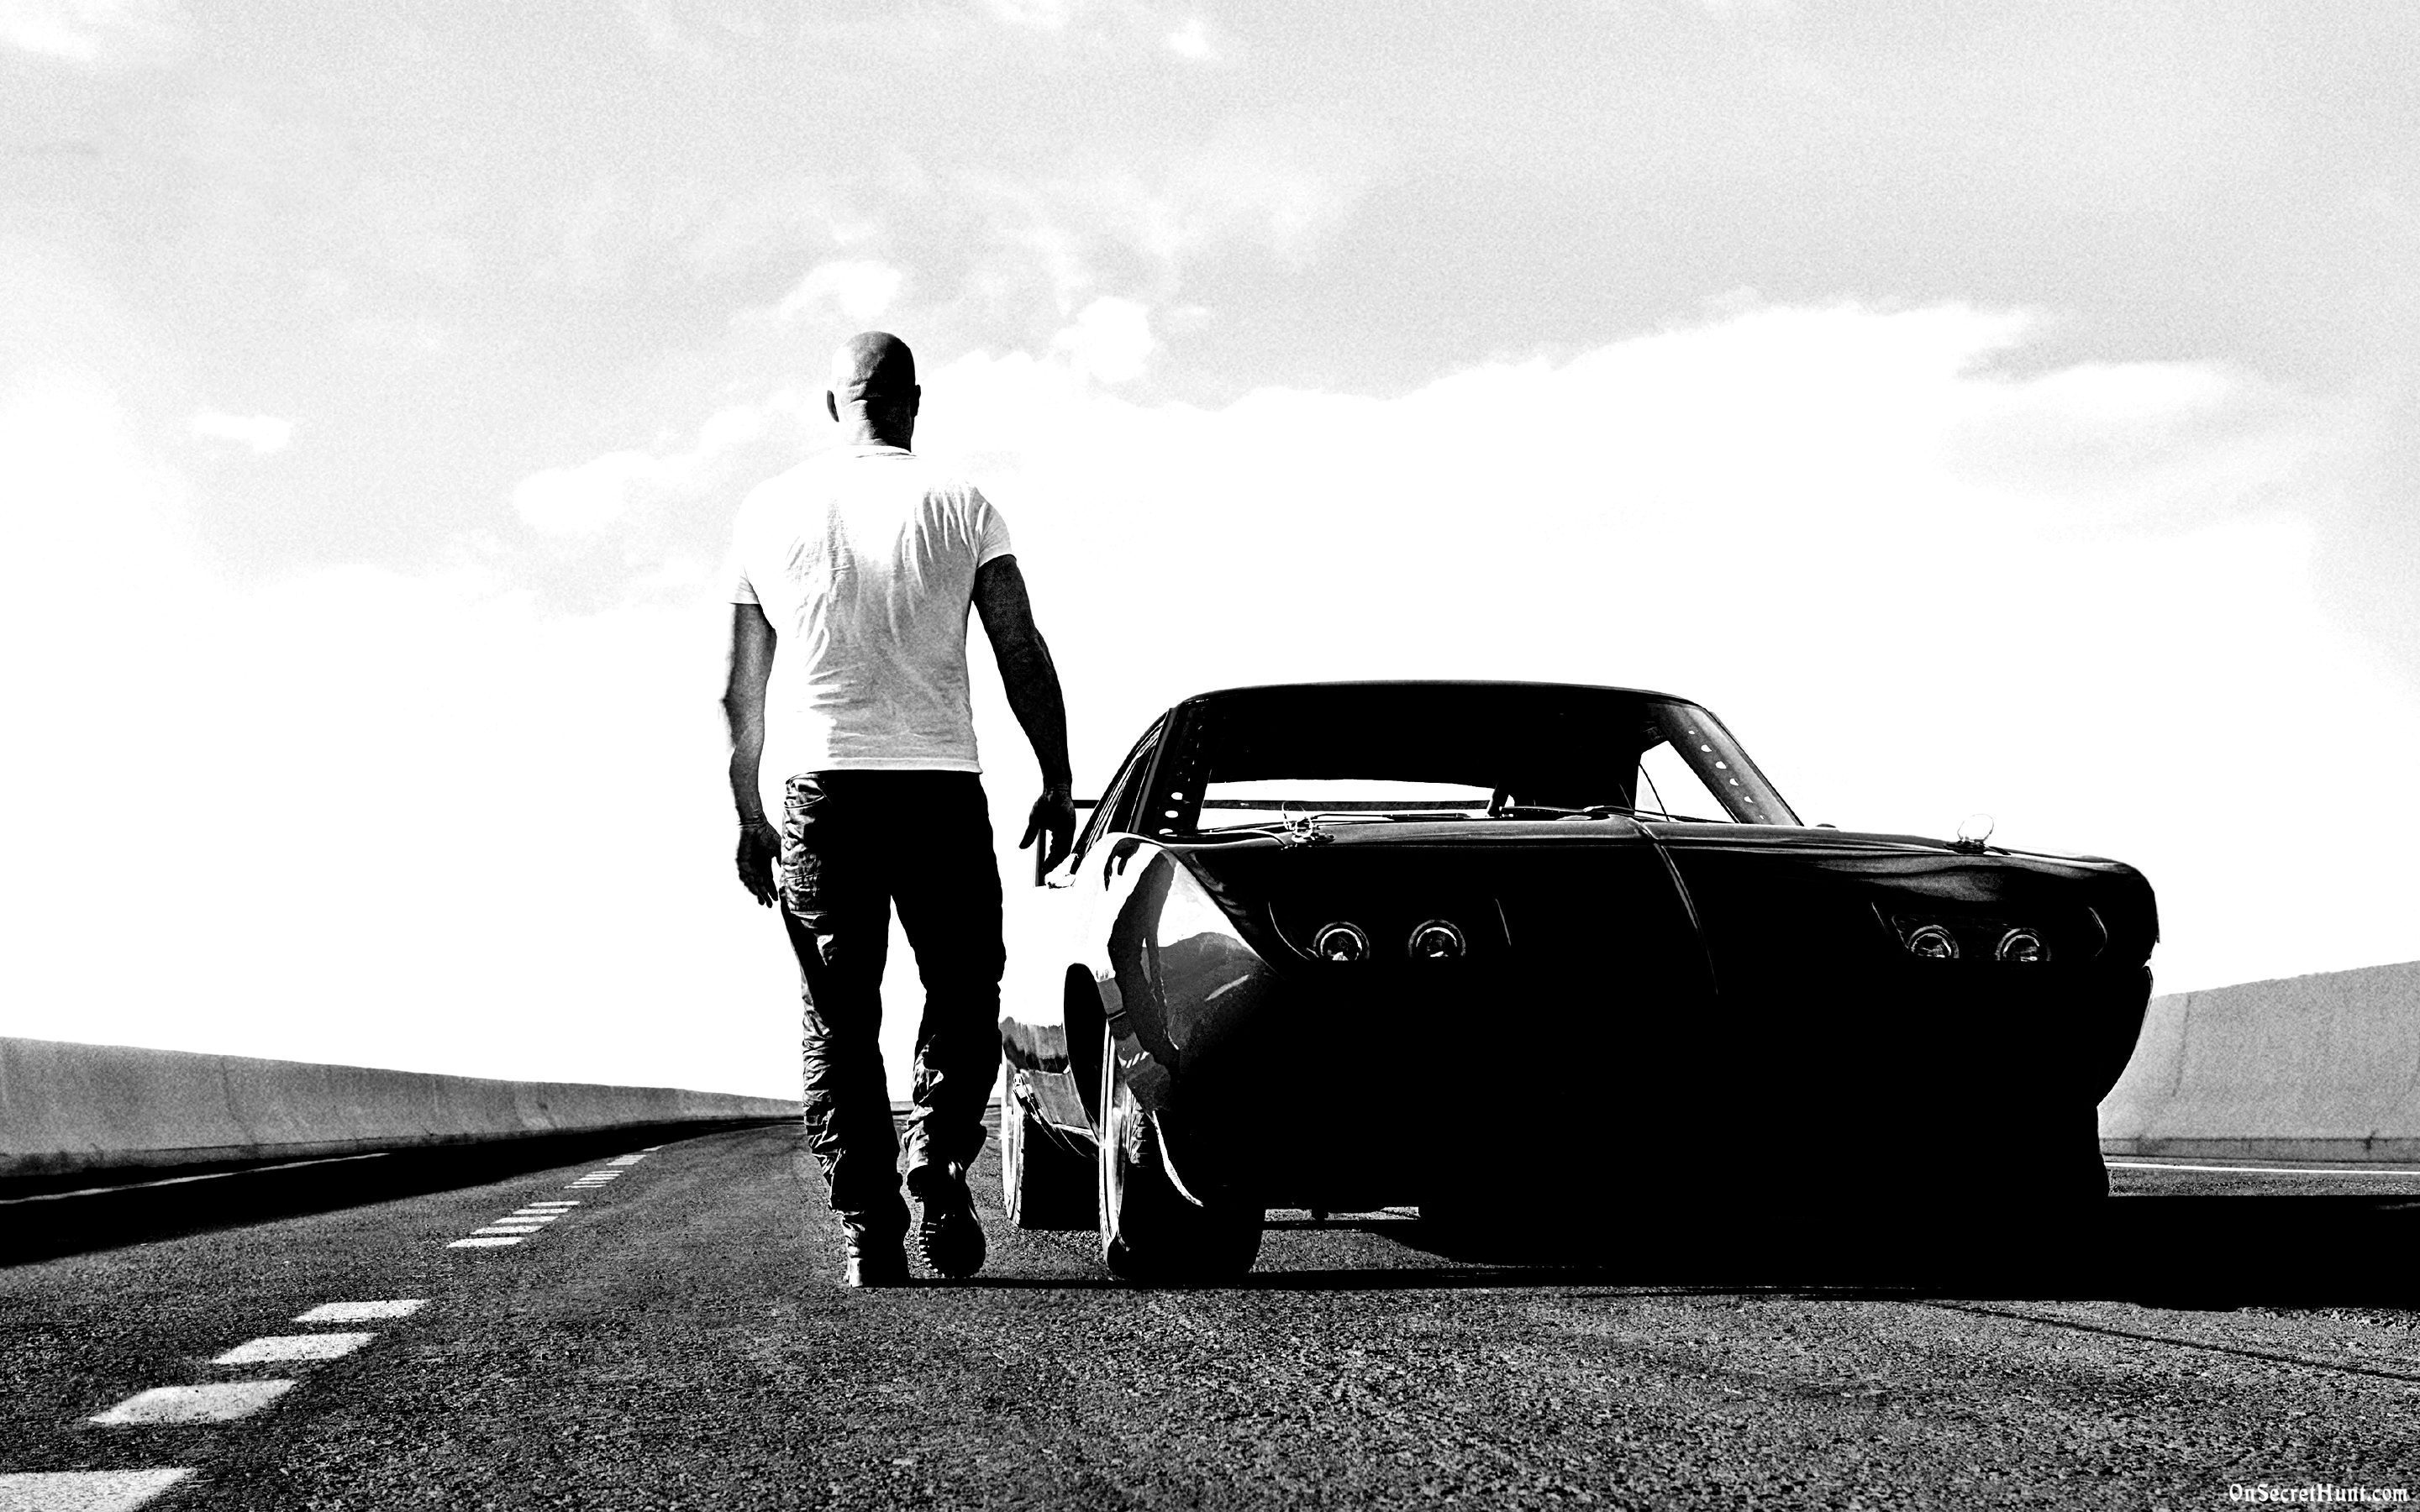 Wallpaper Wednesday Gets Fast And Furious Action A Go